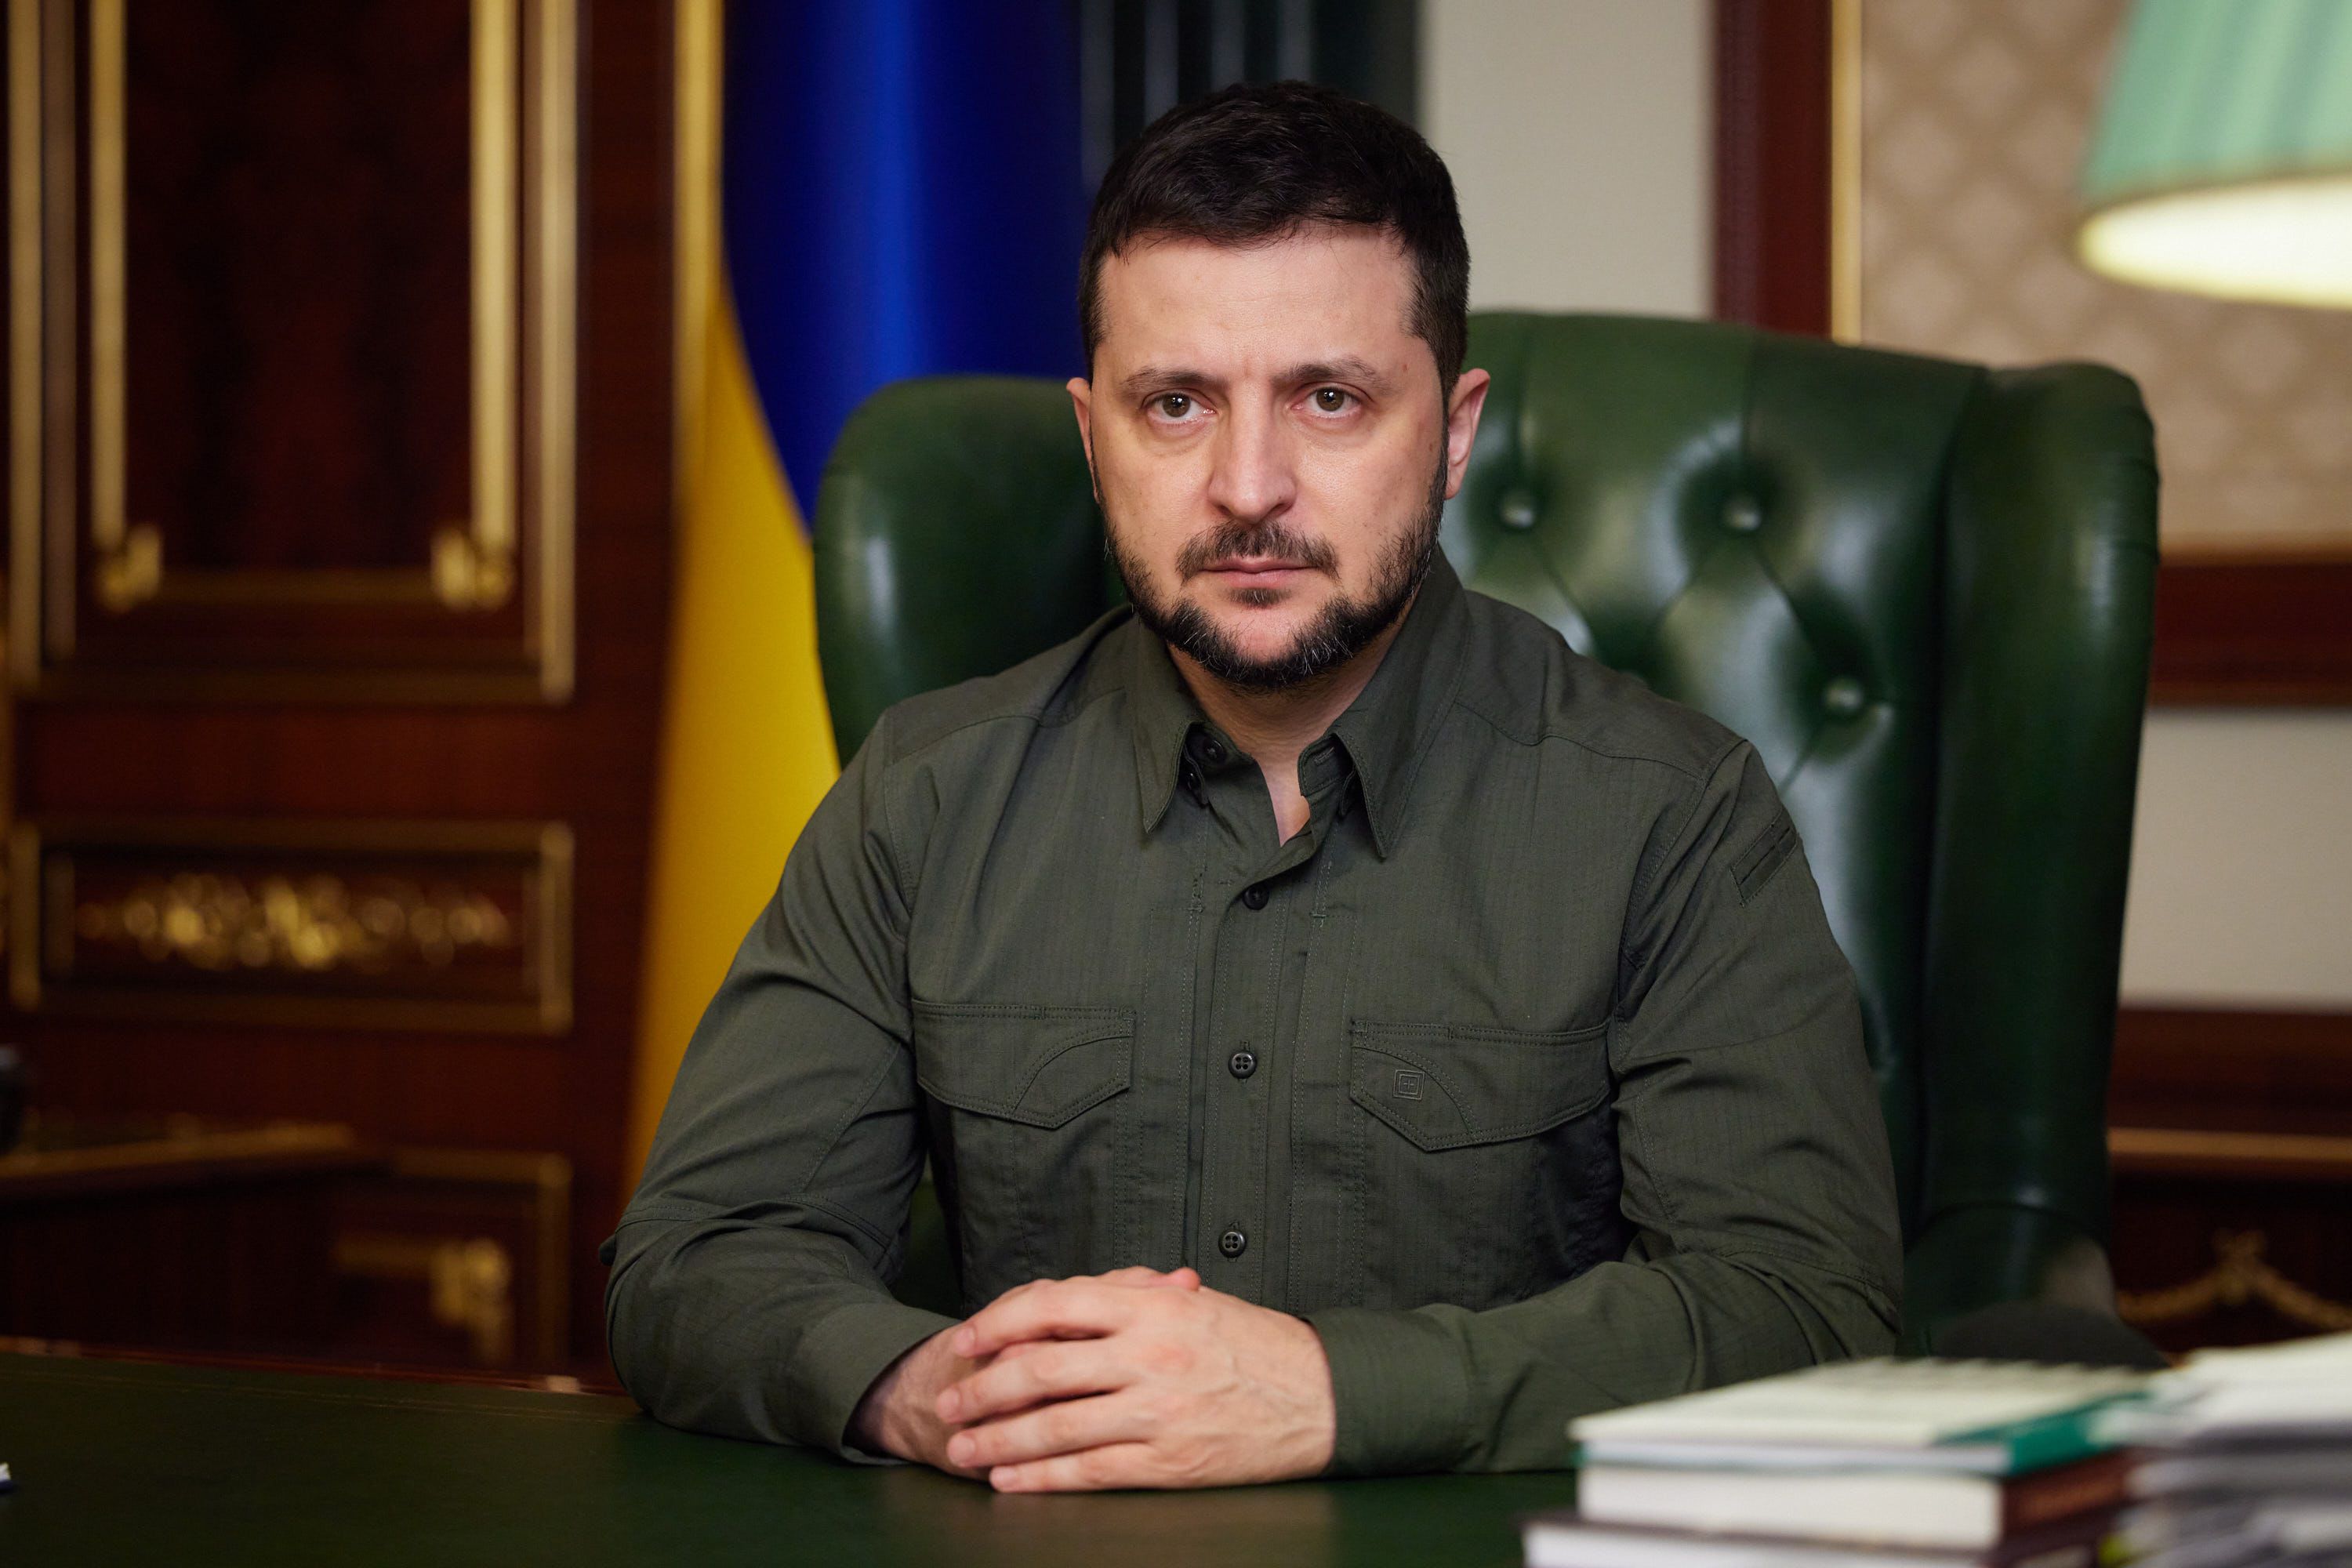 All our actions and every minute are aimed at forcing Russia to recognize the truth - address by the President of Ukraine